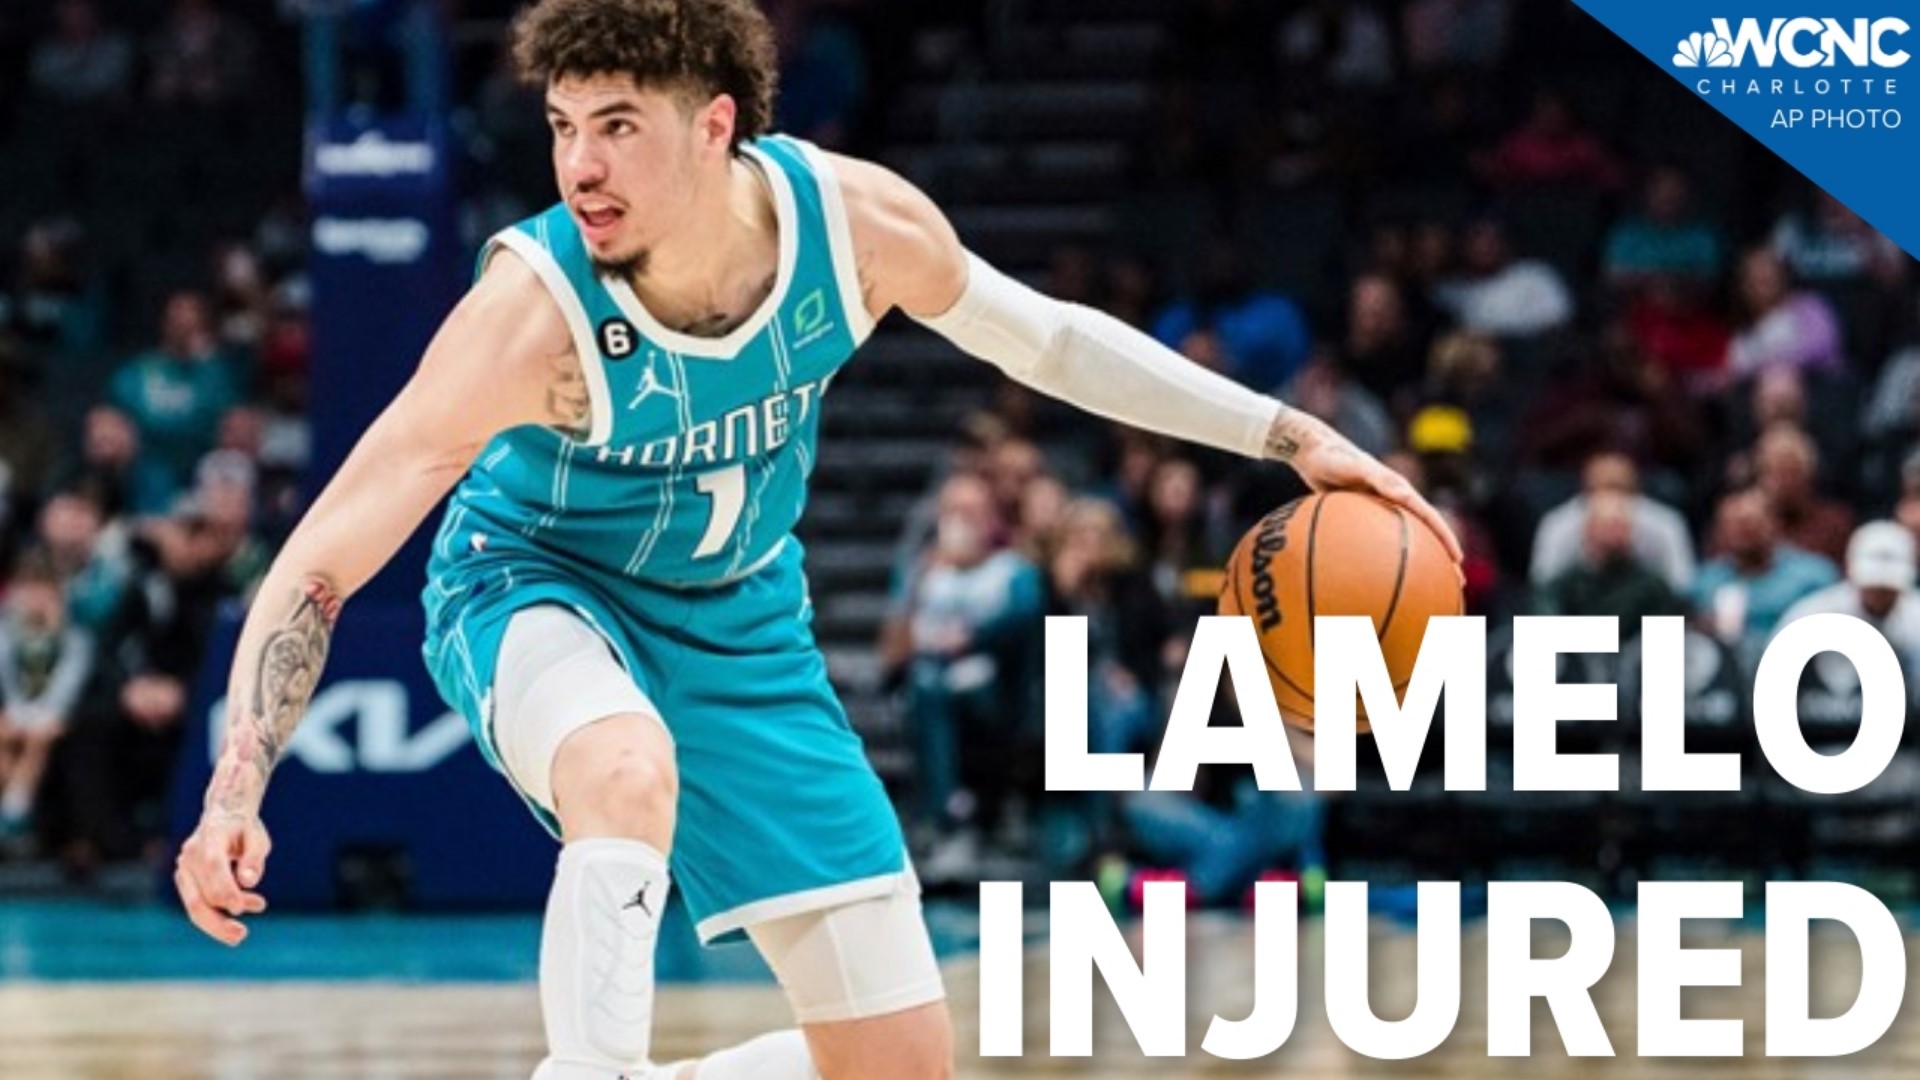 Terry Rozier scored 22 points as the Charlotte Hornets eased past the Detroit Pistons but LaMelo Ball suffered an injury for the fourth time this season.